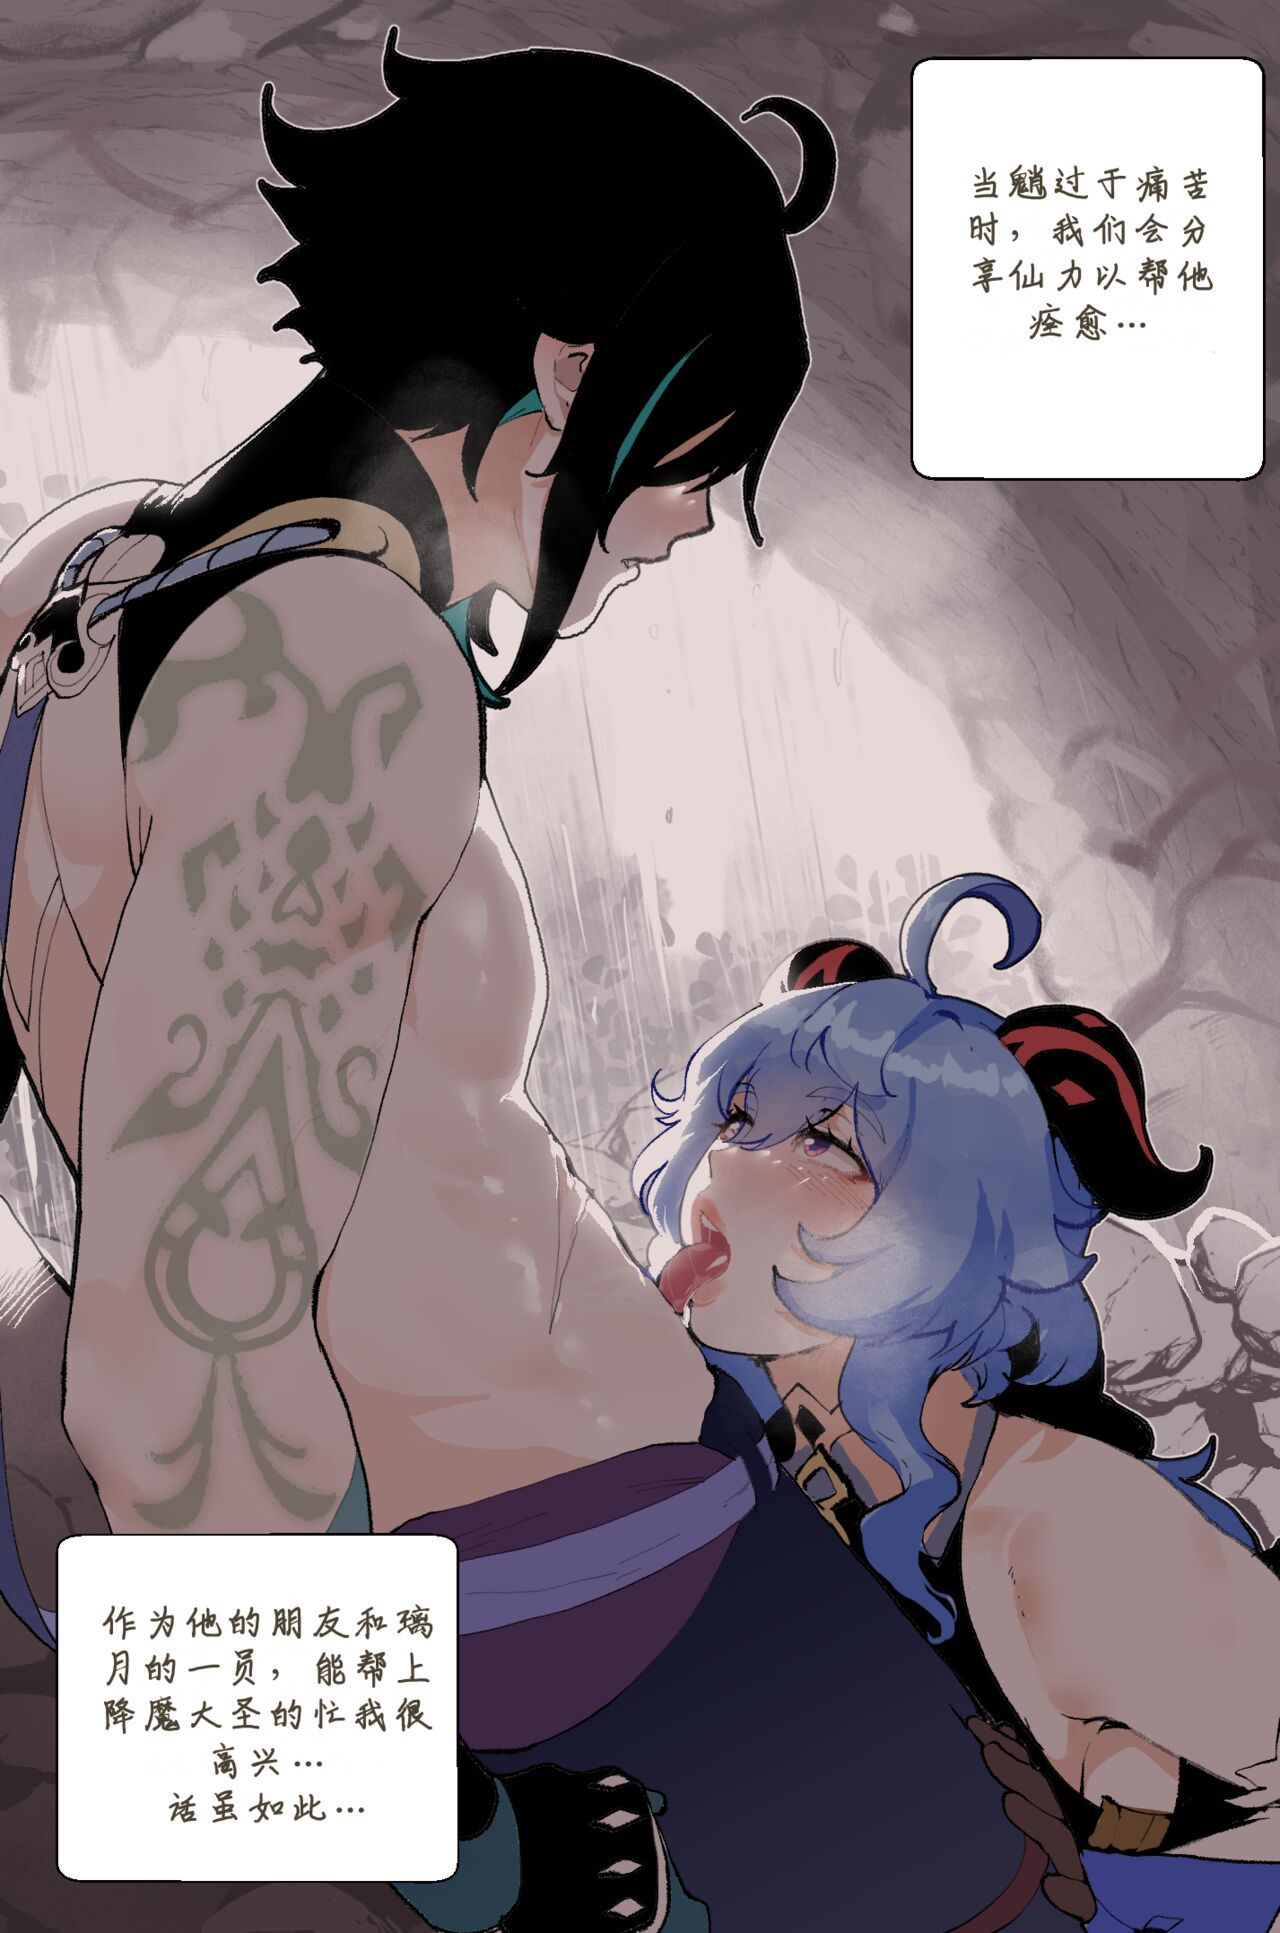 ThiccWithaQ [Chinese] [Ongoing] ThiccWithaQ 【Neko汉化】 59